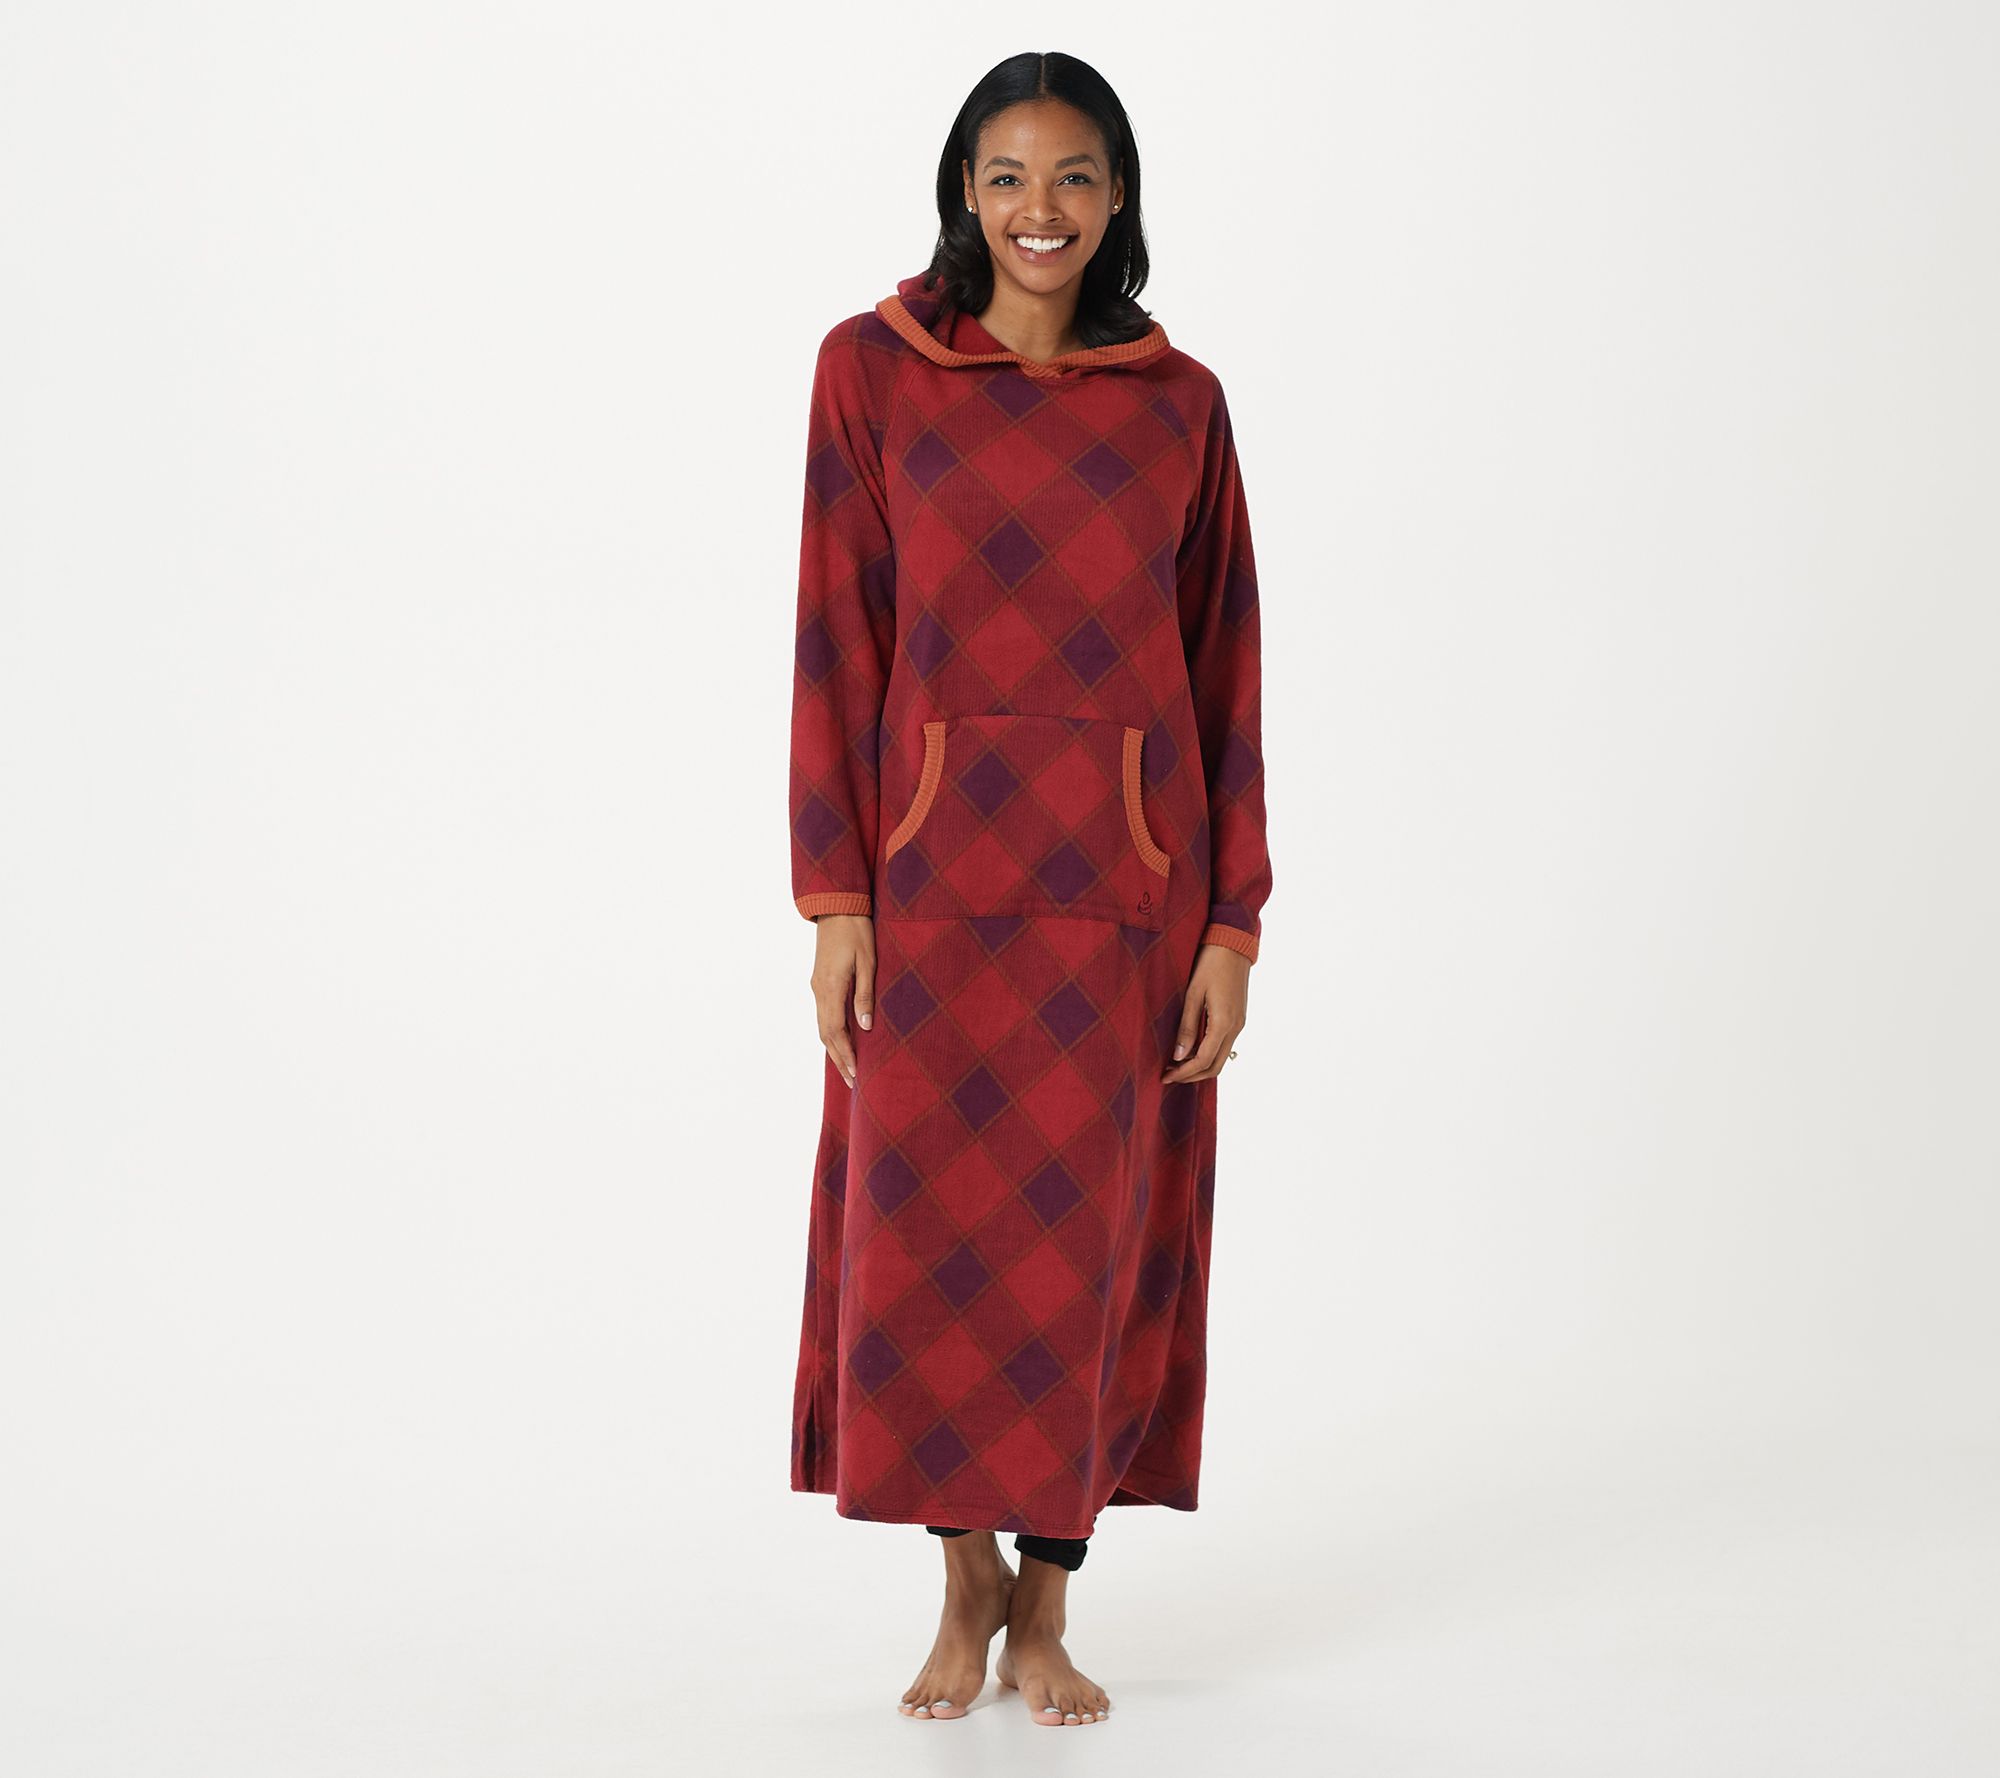 Clothing & Shoes - Pajamas & Loungewear - Cuddl Duds Fleecewear Stretch  Hooded Lounger with Pocket - Online Shopping for Canadians